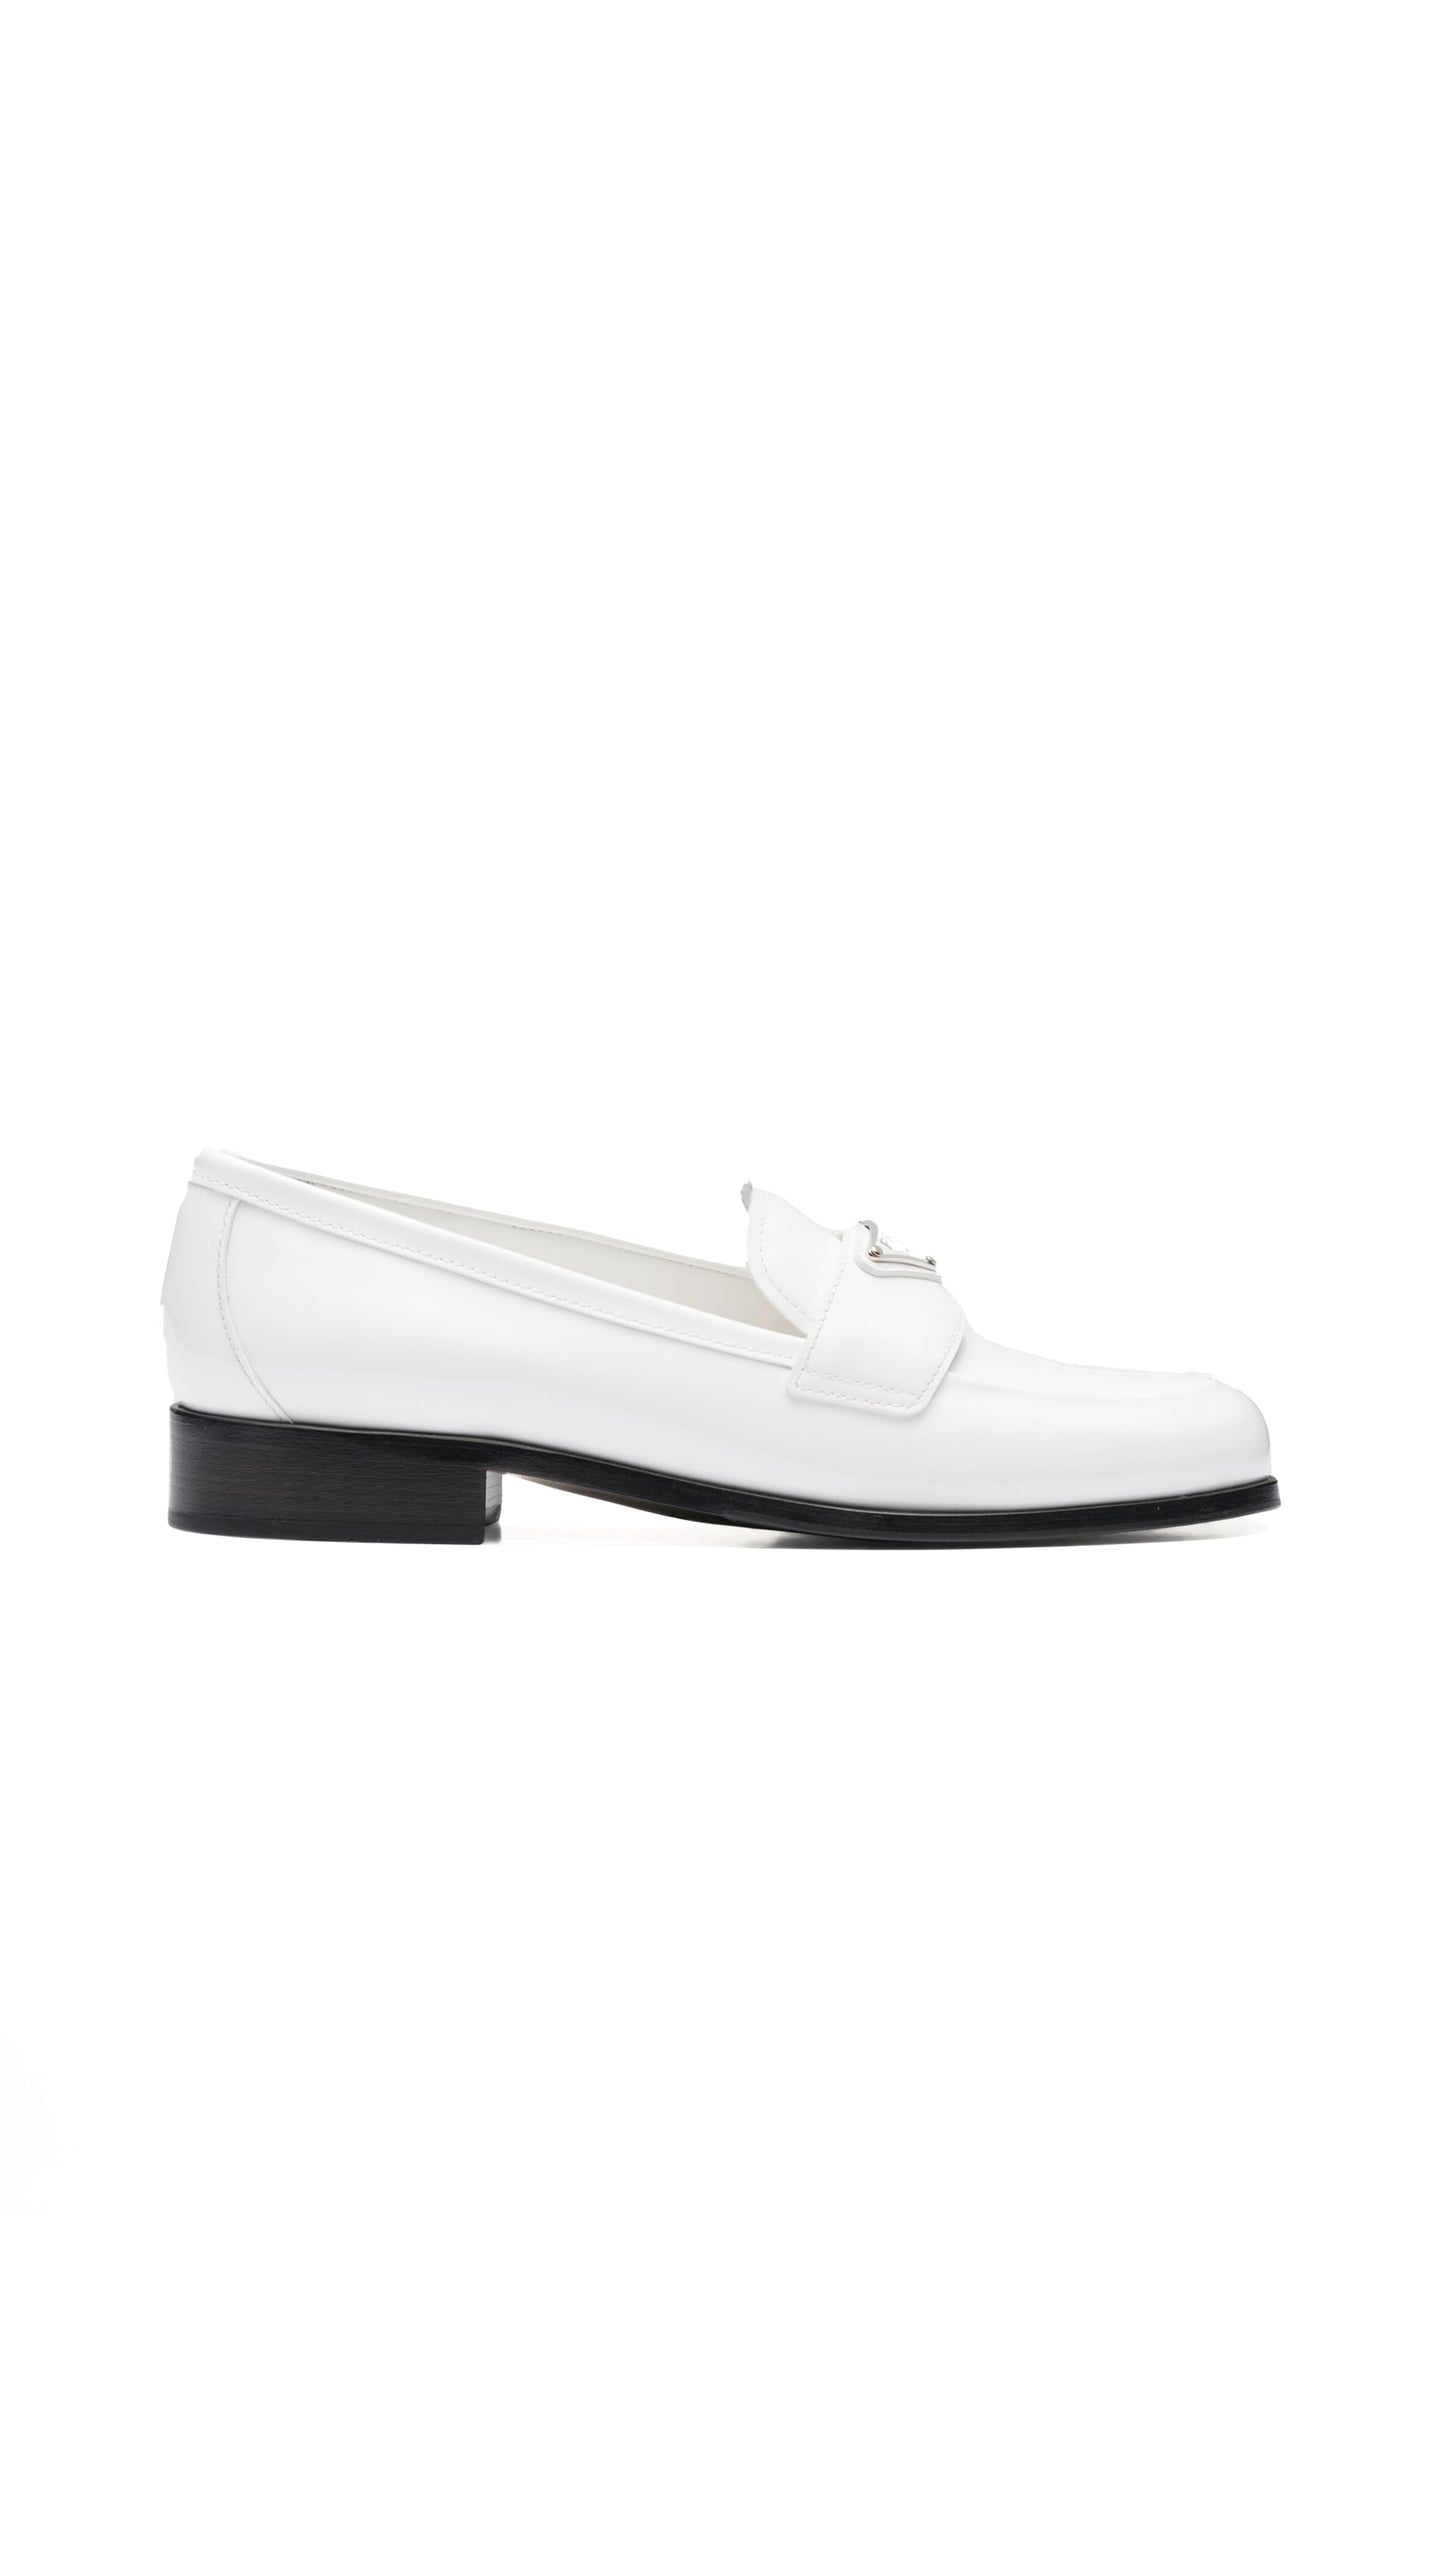 Patent Leather Loafers - White